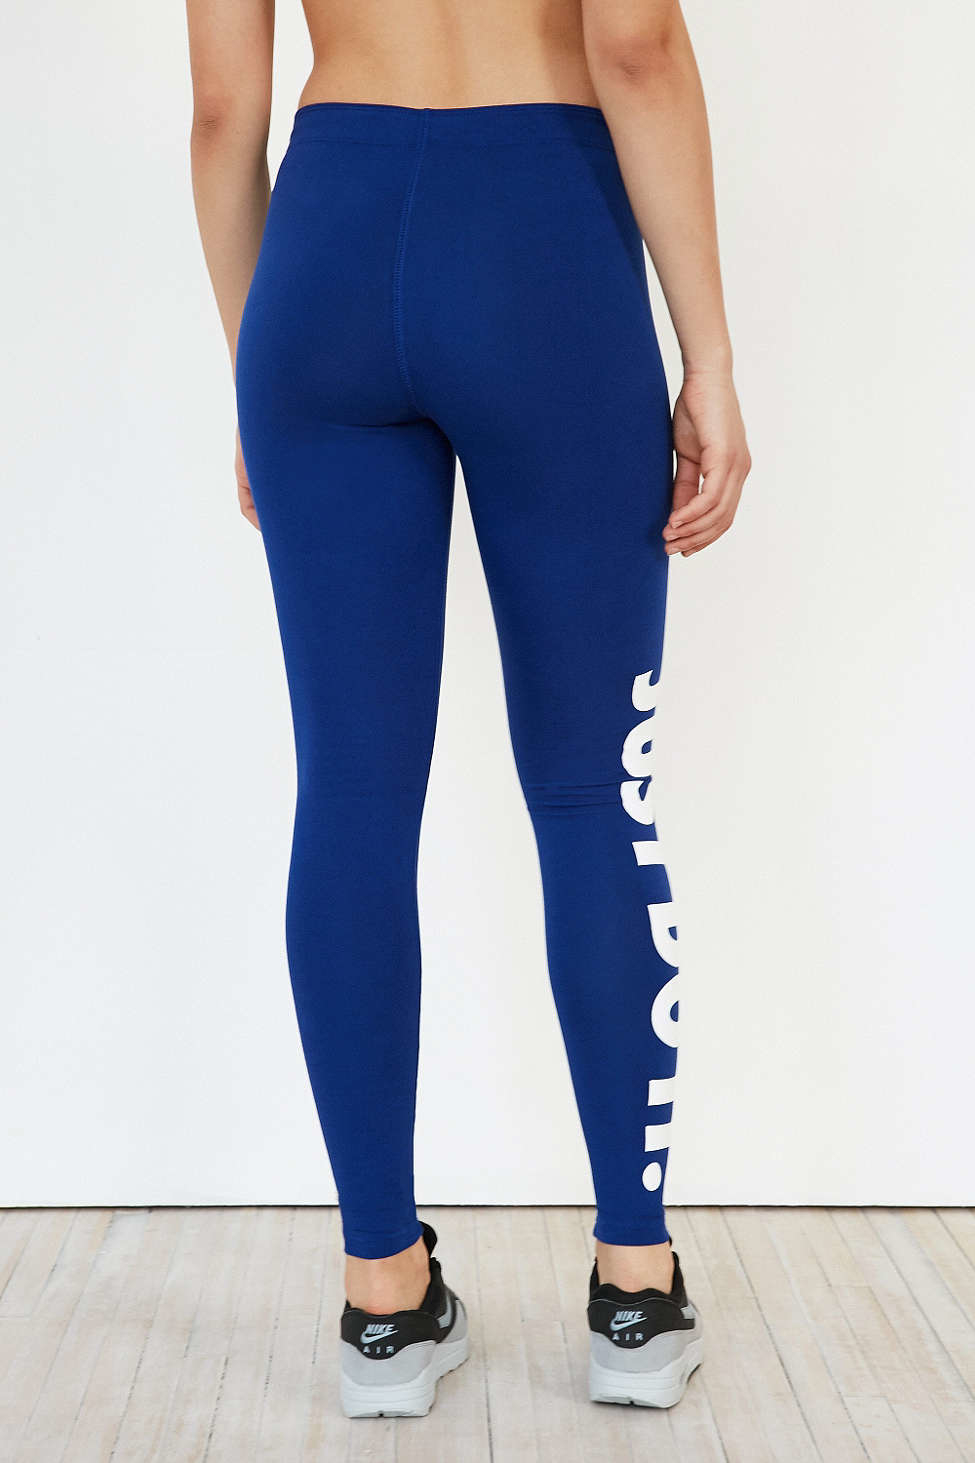 Nike Leg-a-see Just Do It Legging in Blue | Lyst